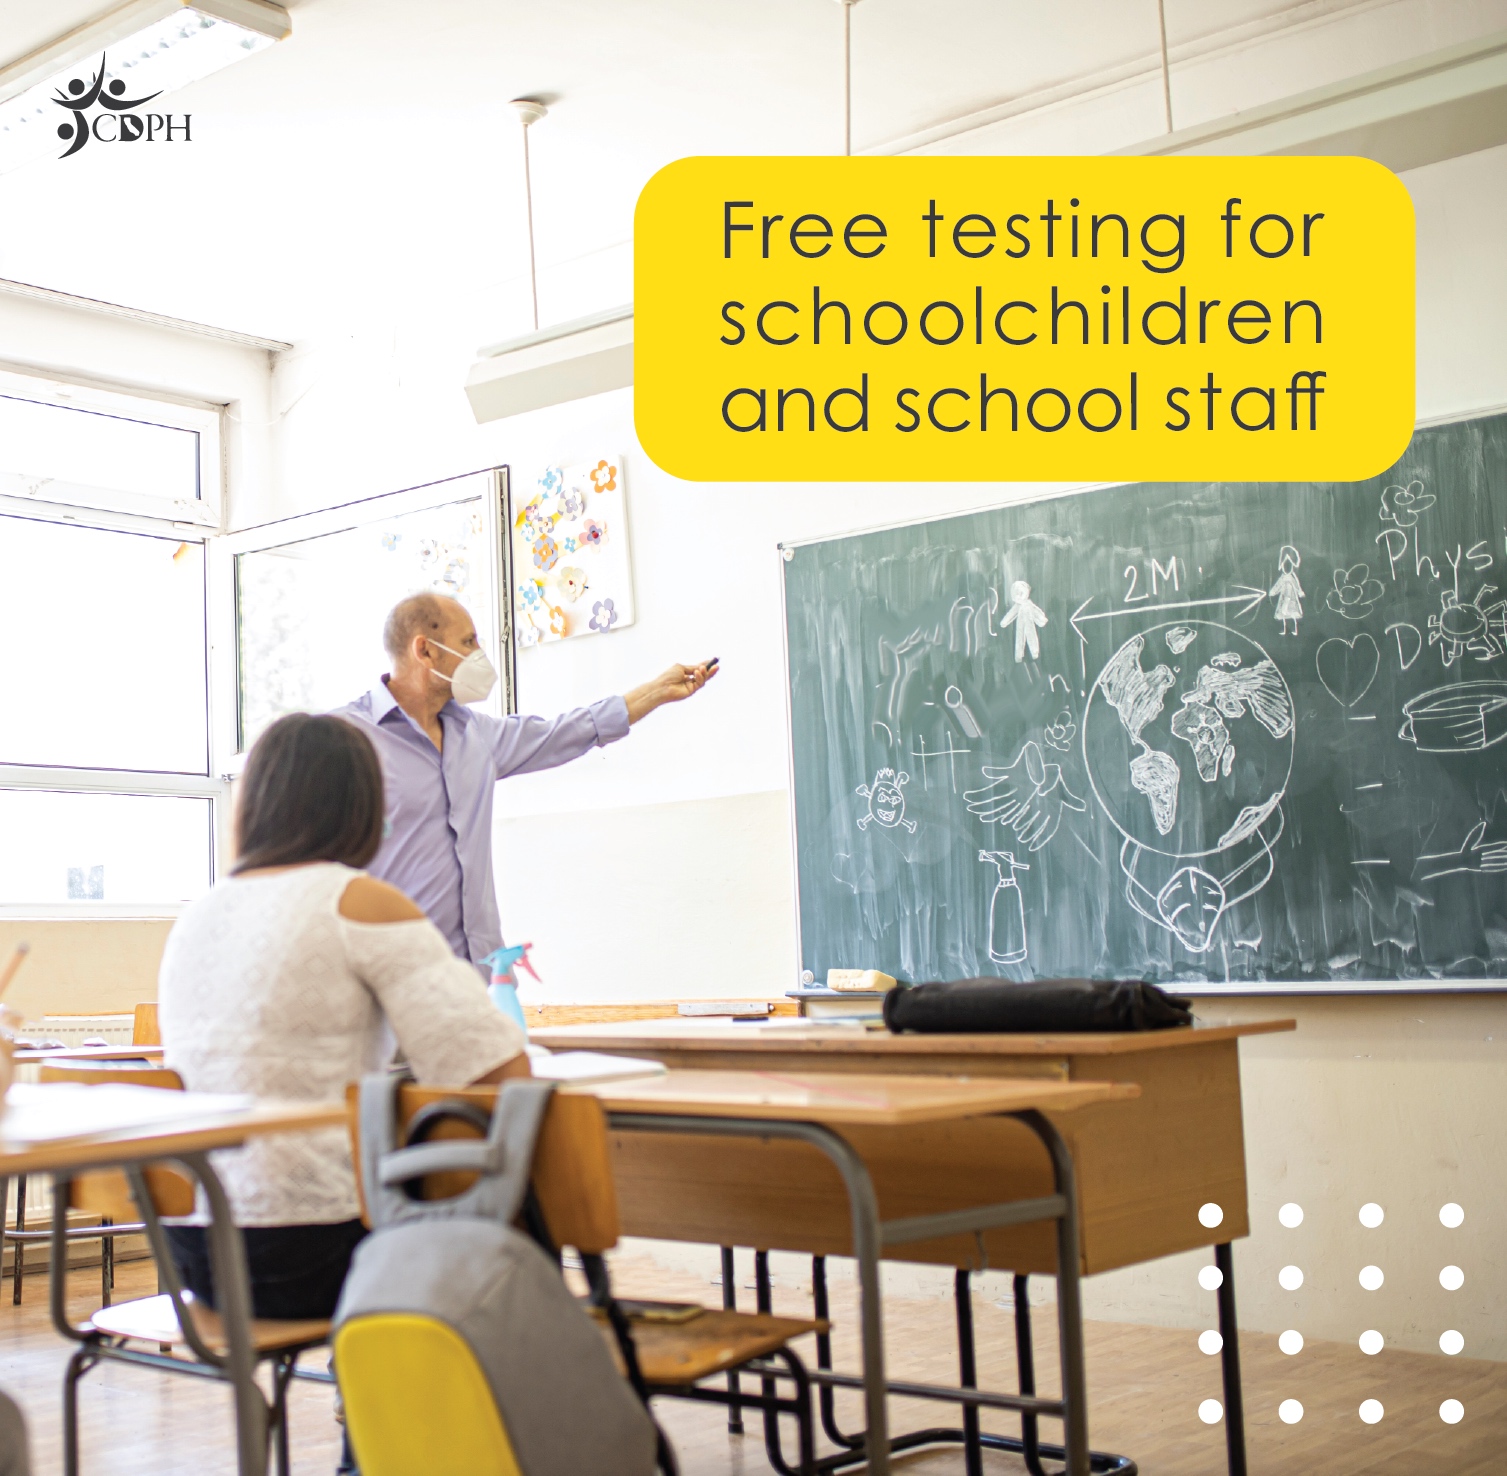 Classroom with teacher and student with text overlay "Free testing for schoolchildren and school staff"